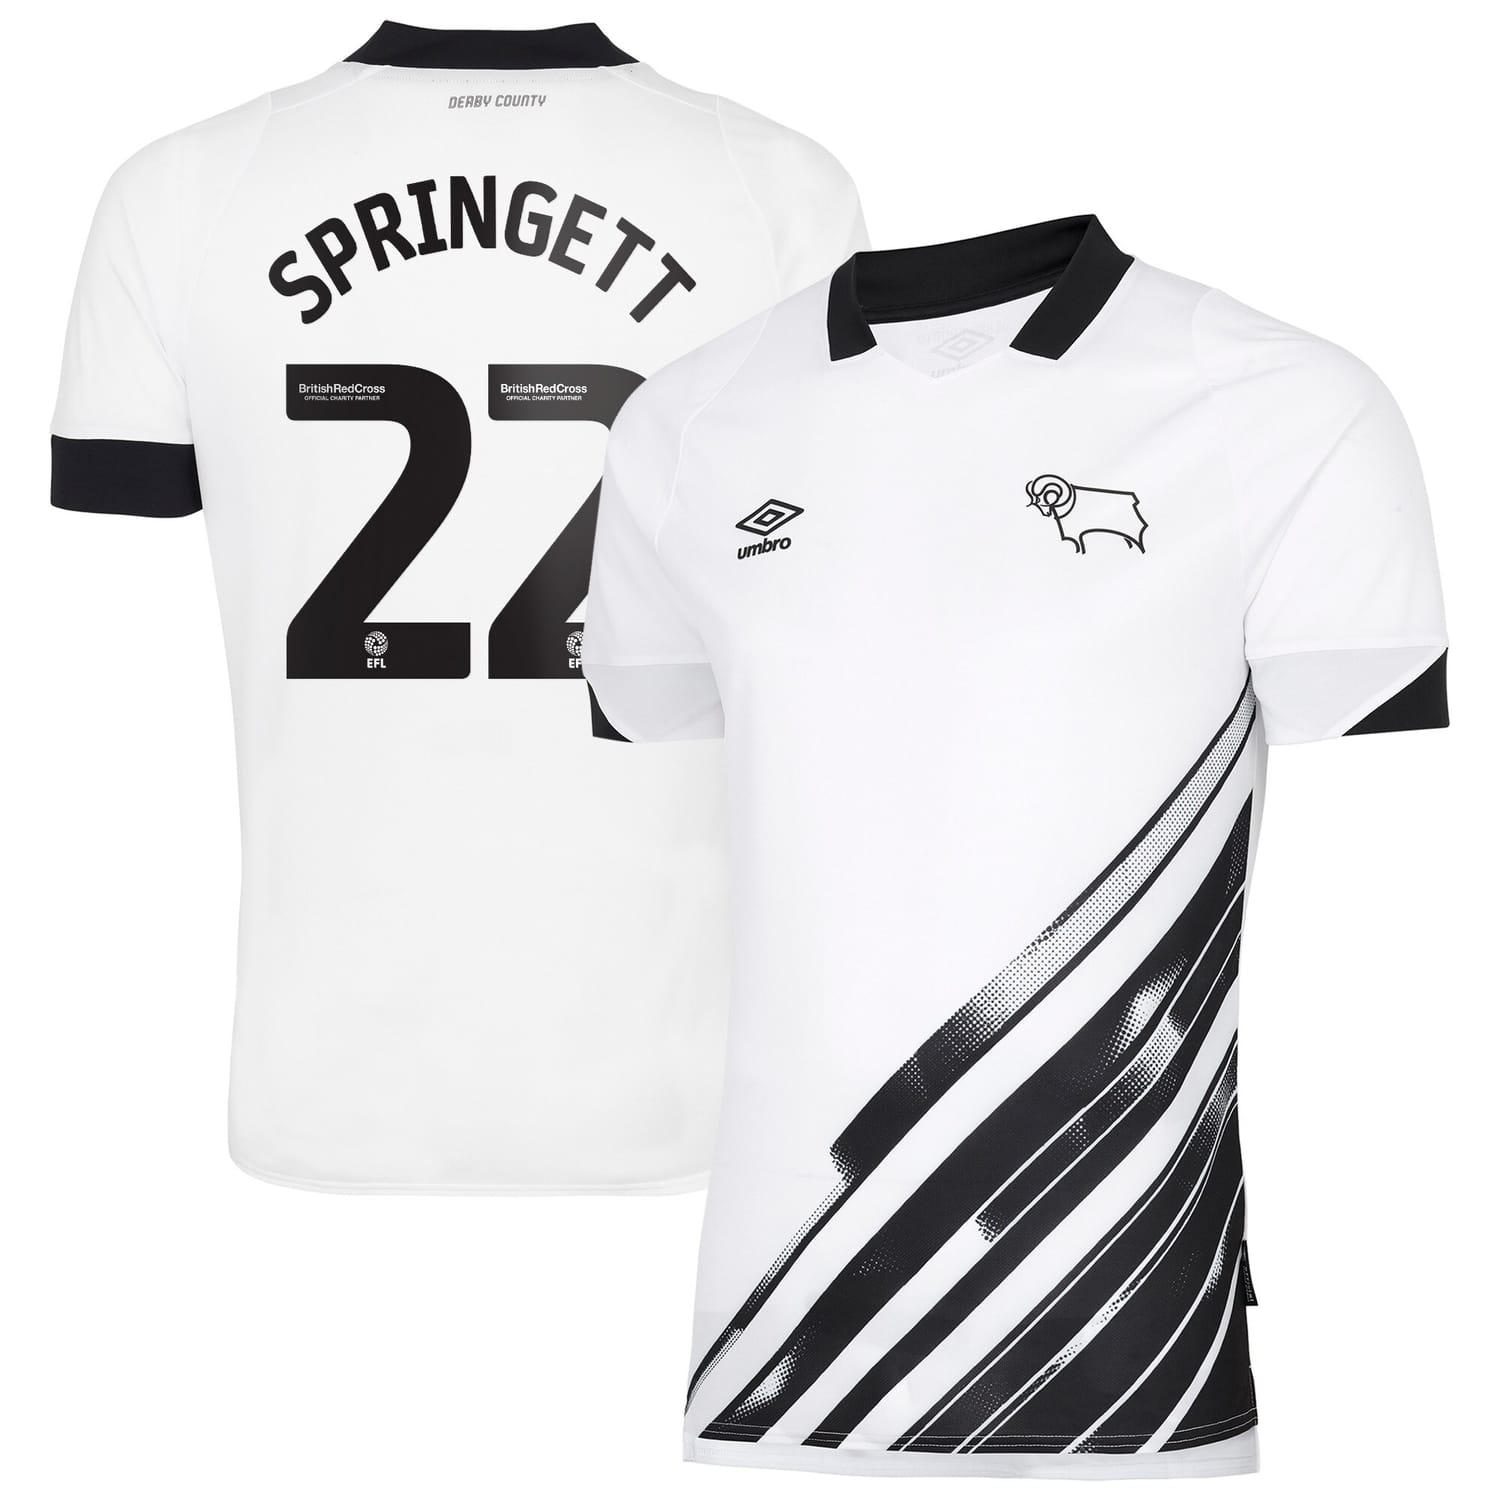 EFL League One Derby County Home Jersey Shirt 2022-23 player Tony Springett 22 printing for Men